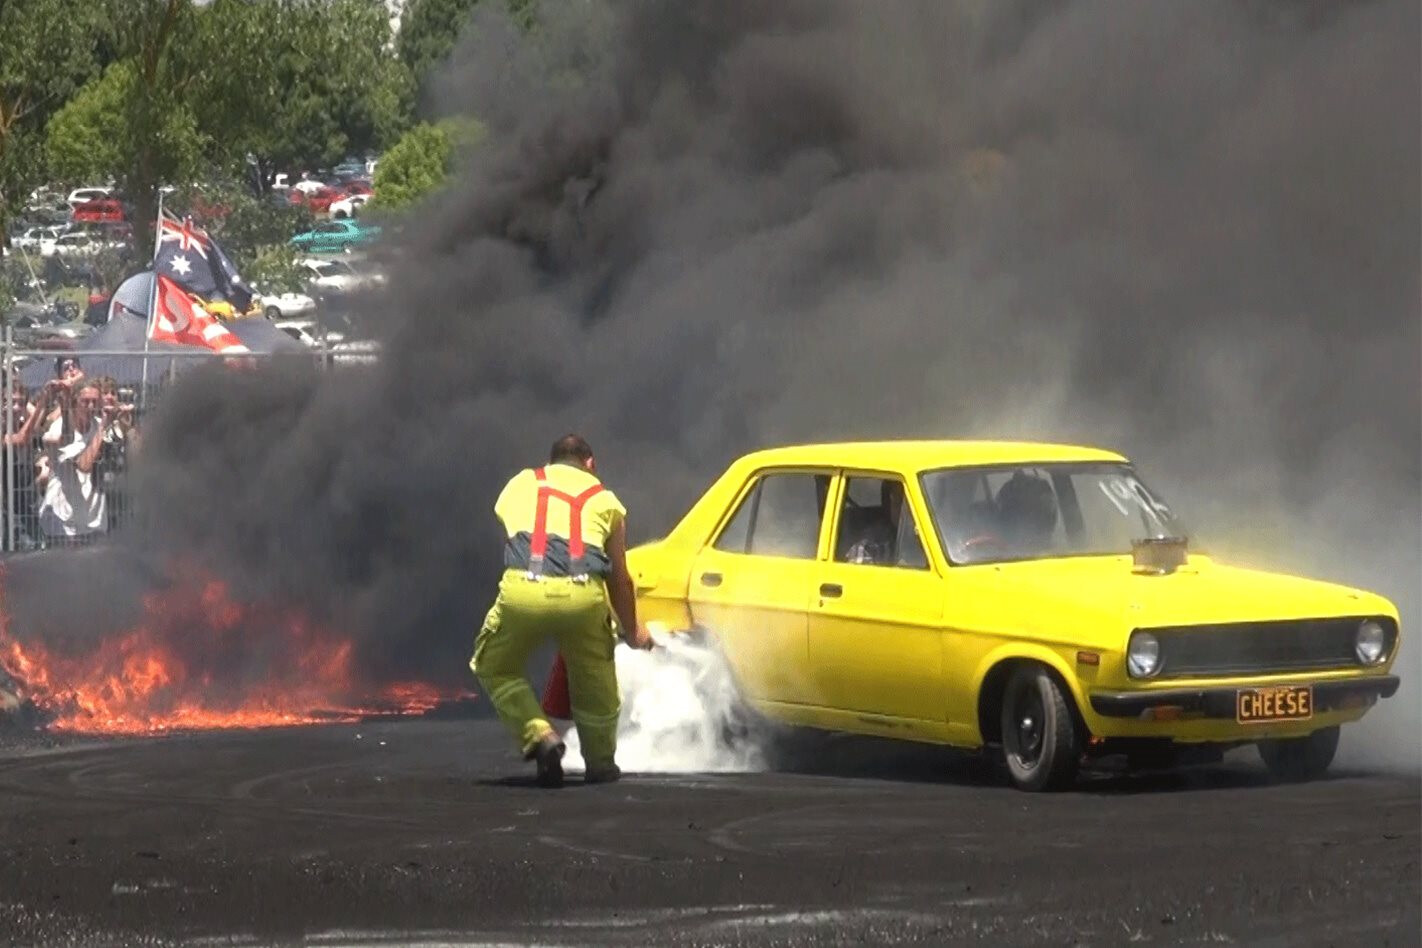 VIDEO: CRAZY V8 DATSUN TRIES TO BURN EVERYTHING AT TREAD CEMETERY